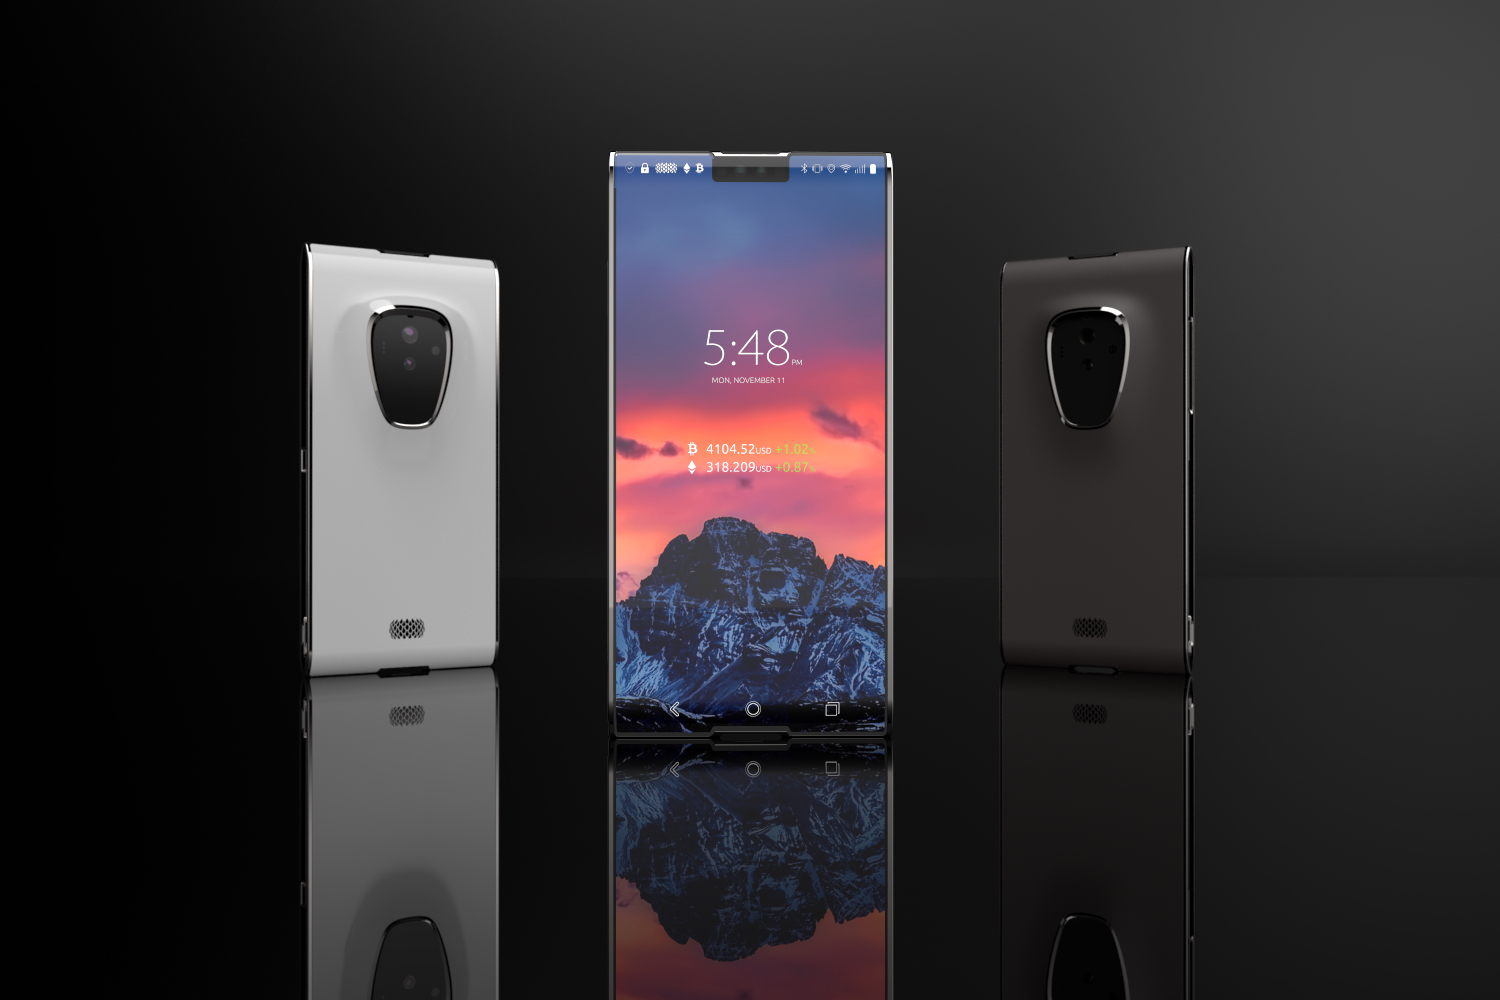 The world's first smartphone-smartphone will run on the platform Ethereum